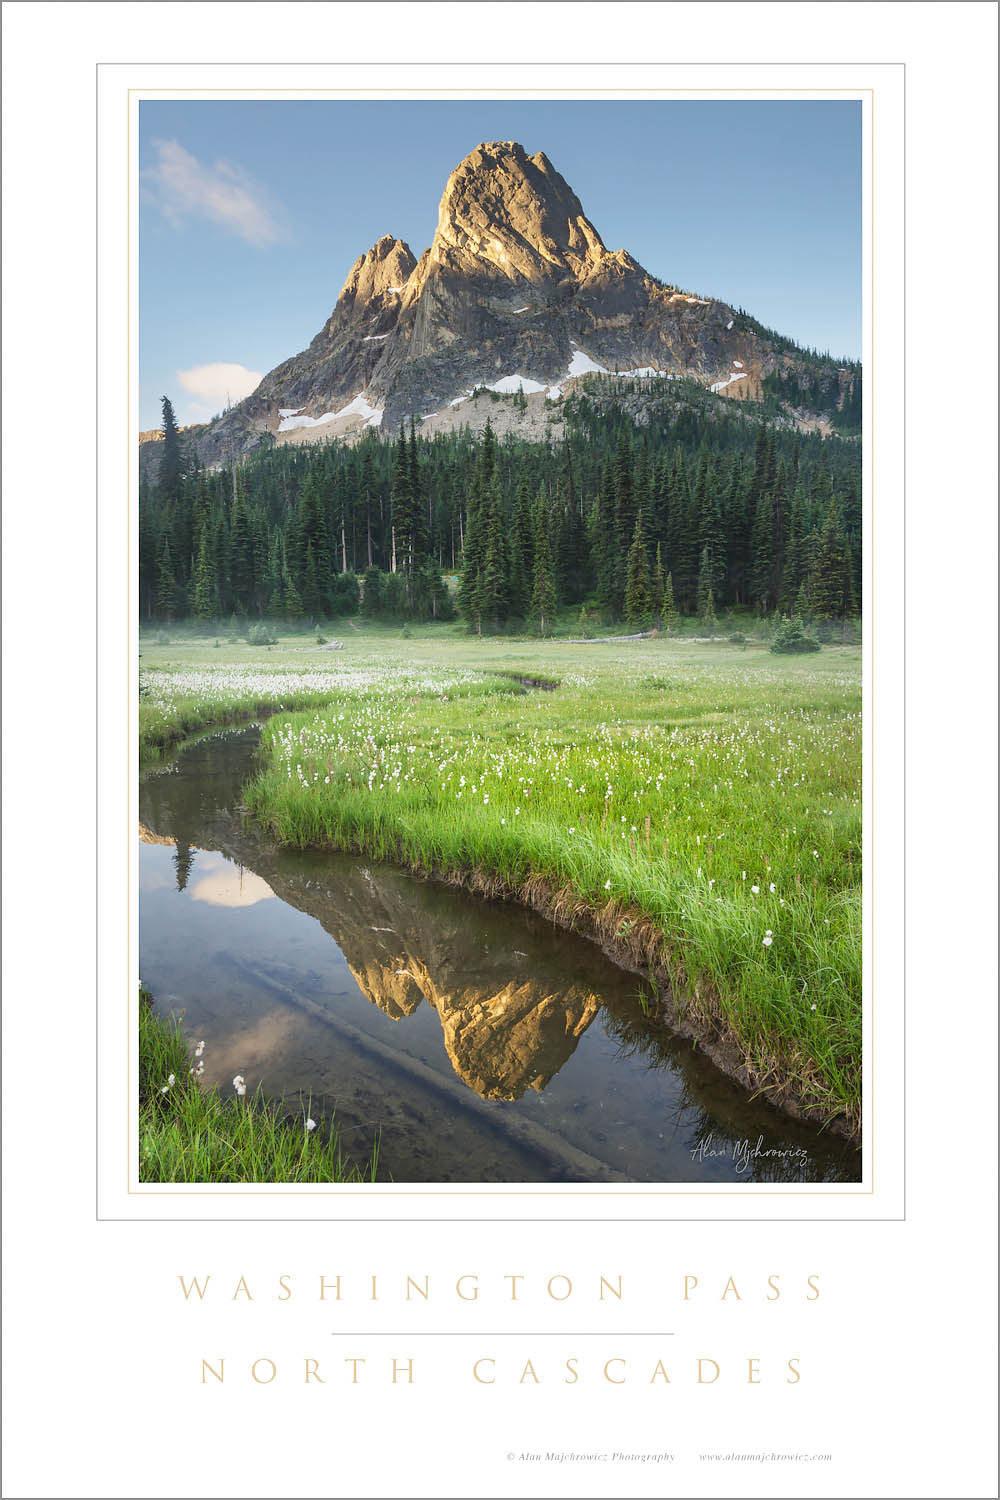 Liberty Bell Mountain reflected in waters of State Creek, Washington Pass meadows, North Cascades Washington